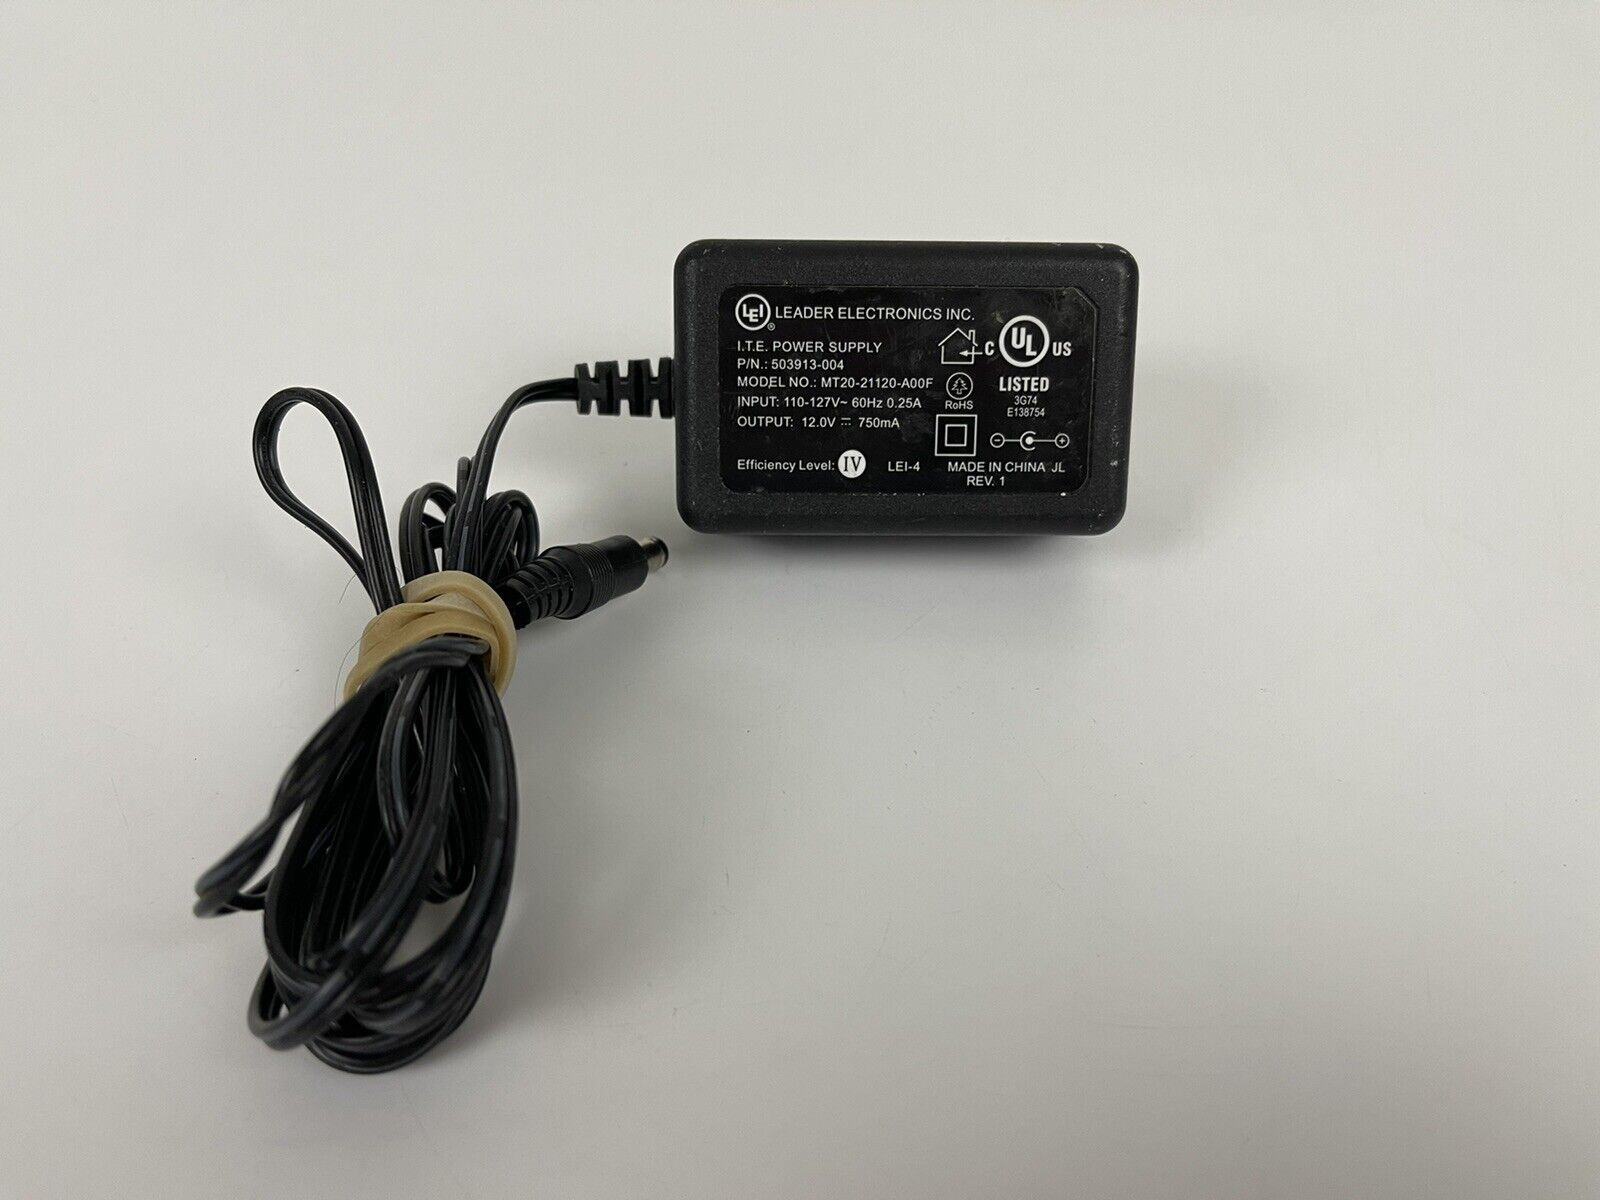 LEI MT20-21120-A00F AC Power Supply Adapter Charger 12V DC 750mAh Brand: Lei Type: AC/DC Adapter Output Voltage: 12